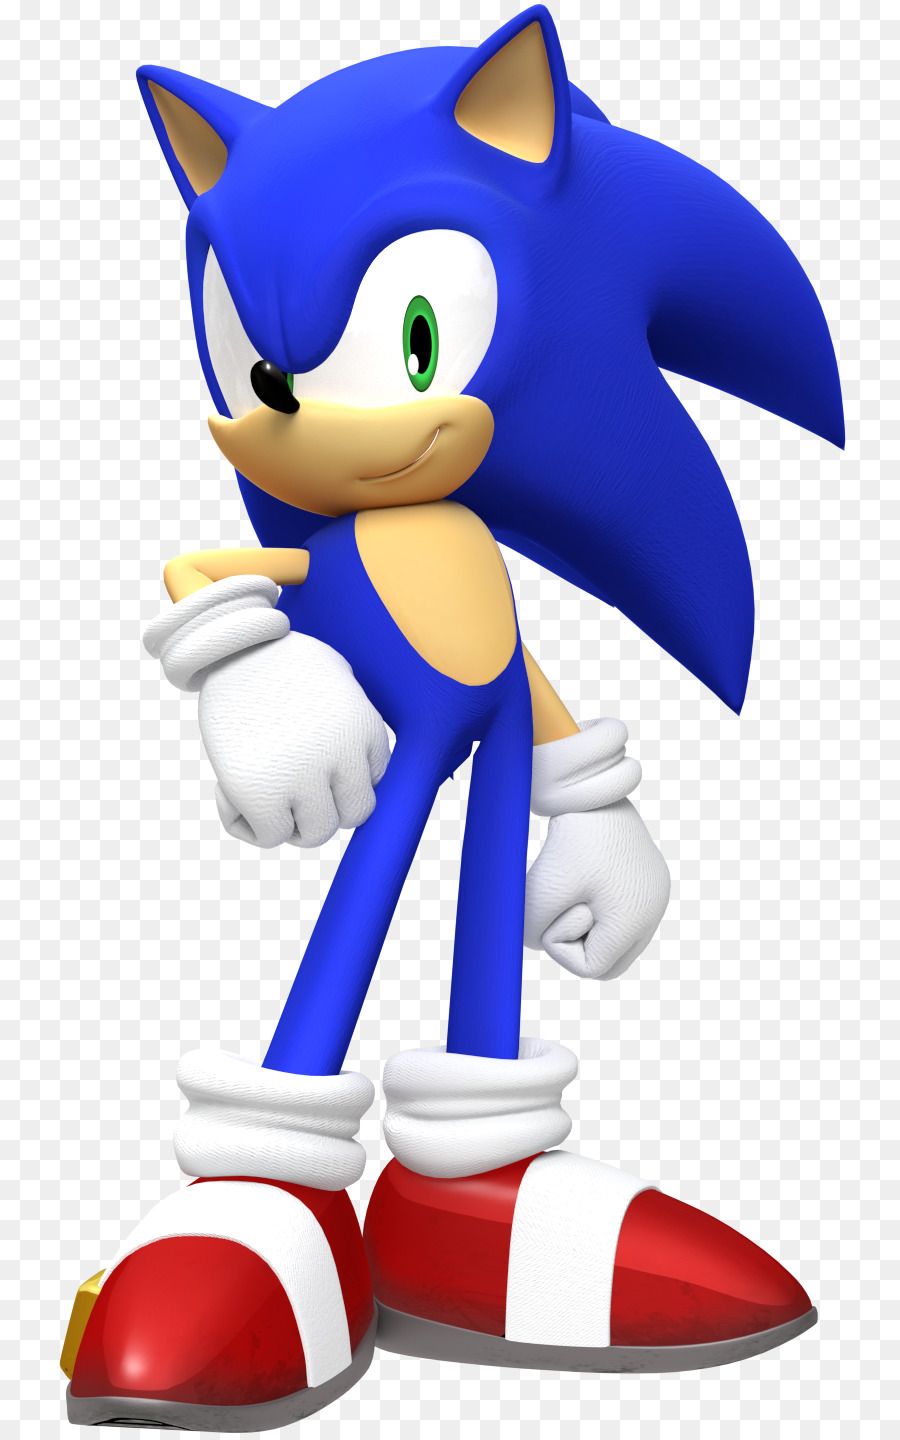 Sonic the Hedgehog 2 Sonic 3D Tails - Sonic png download - 799*1440